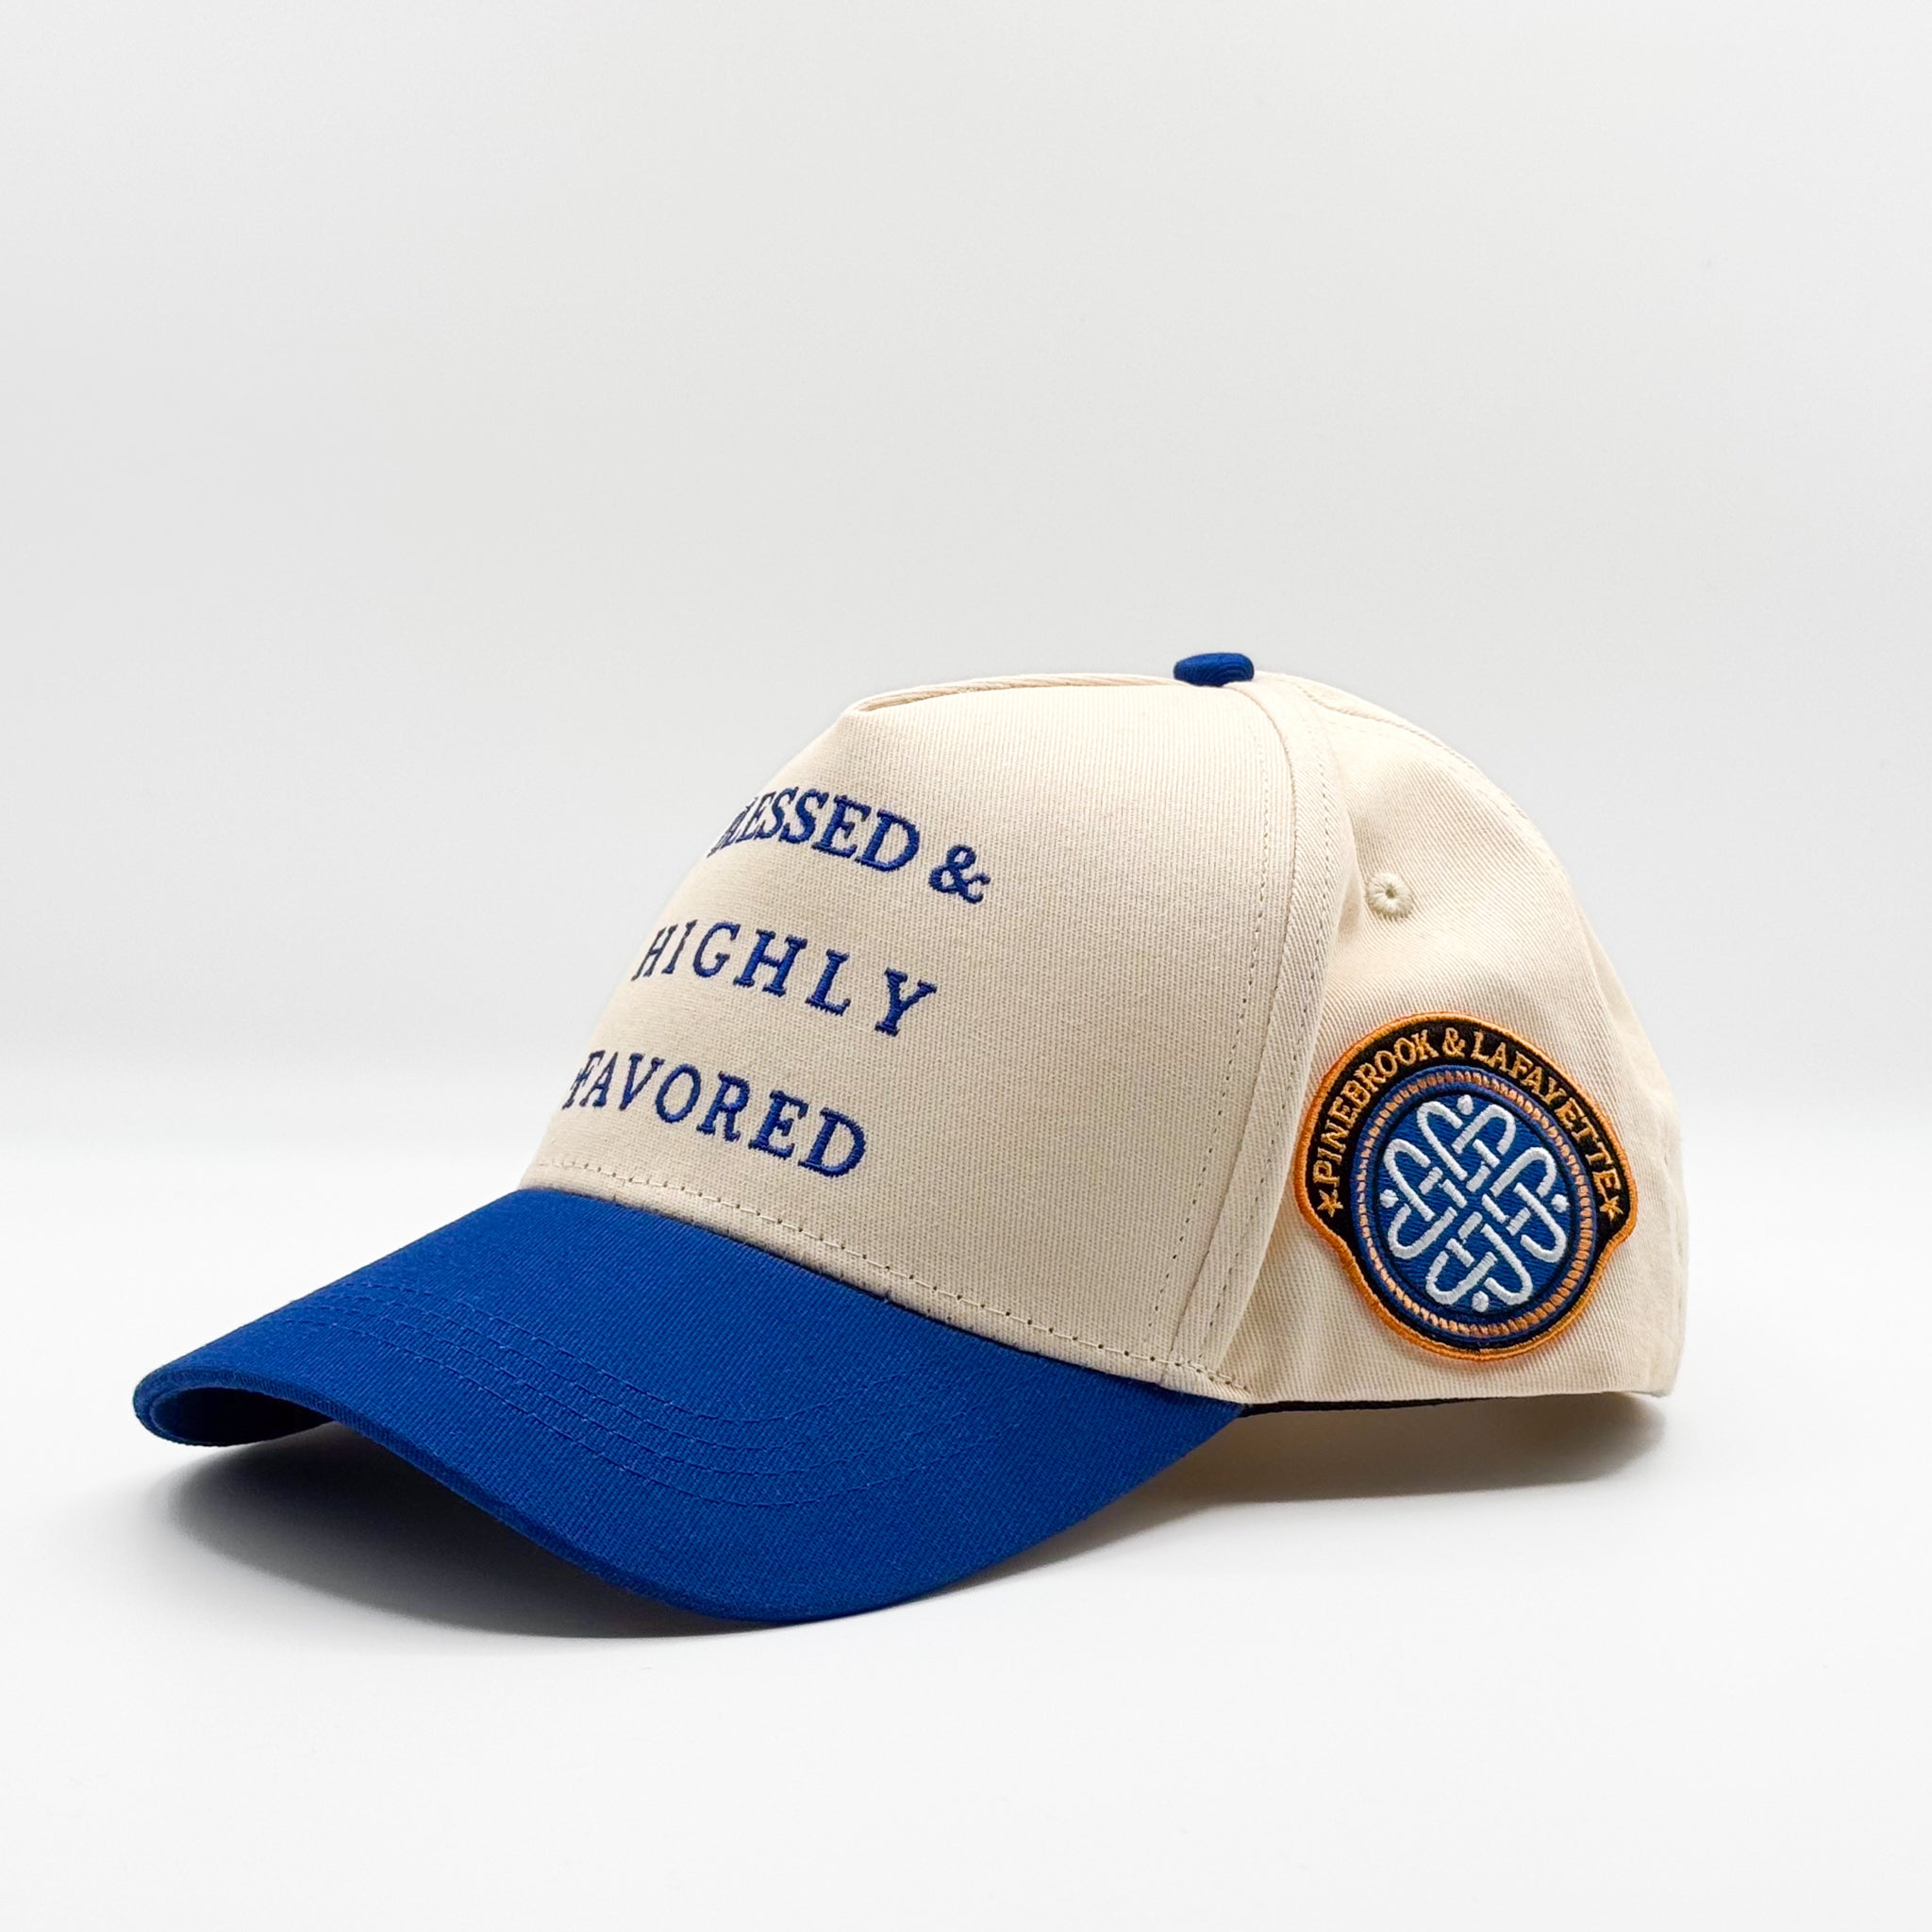 Blessed & Highly Favored Snapback - Royal and Cream